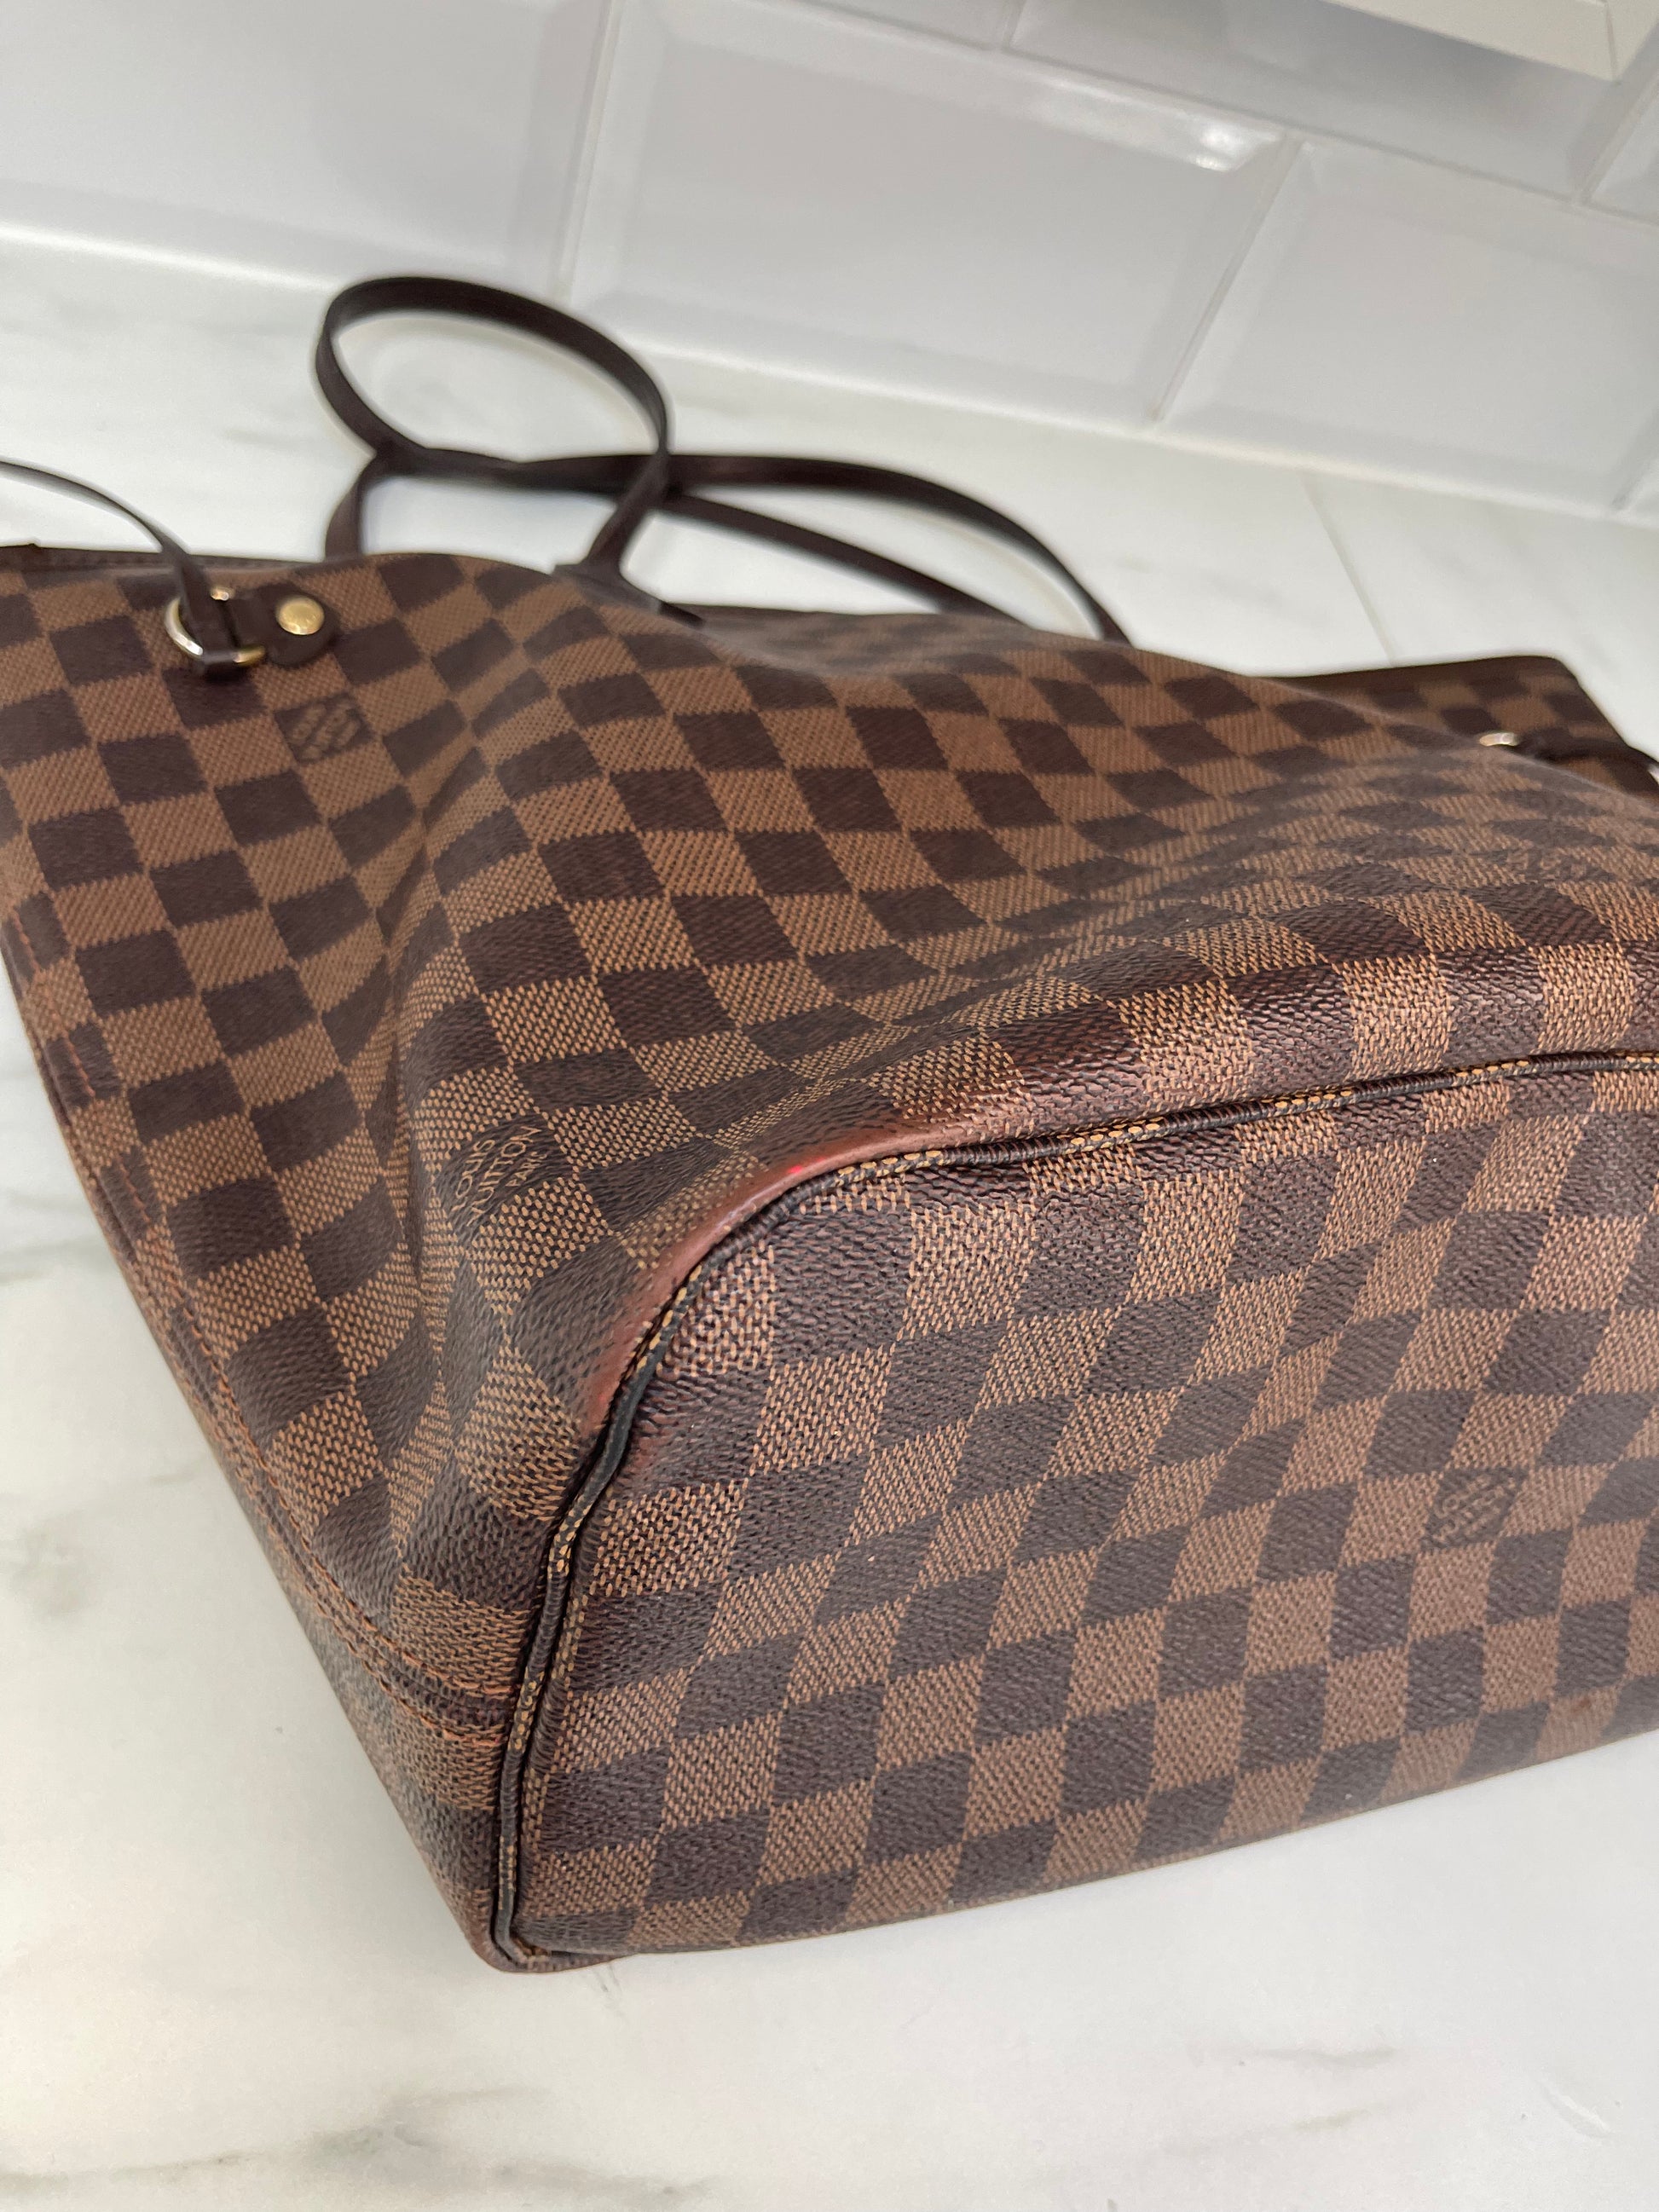 authentic neverfull louis vuittons